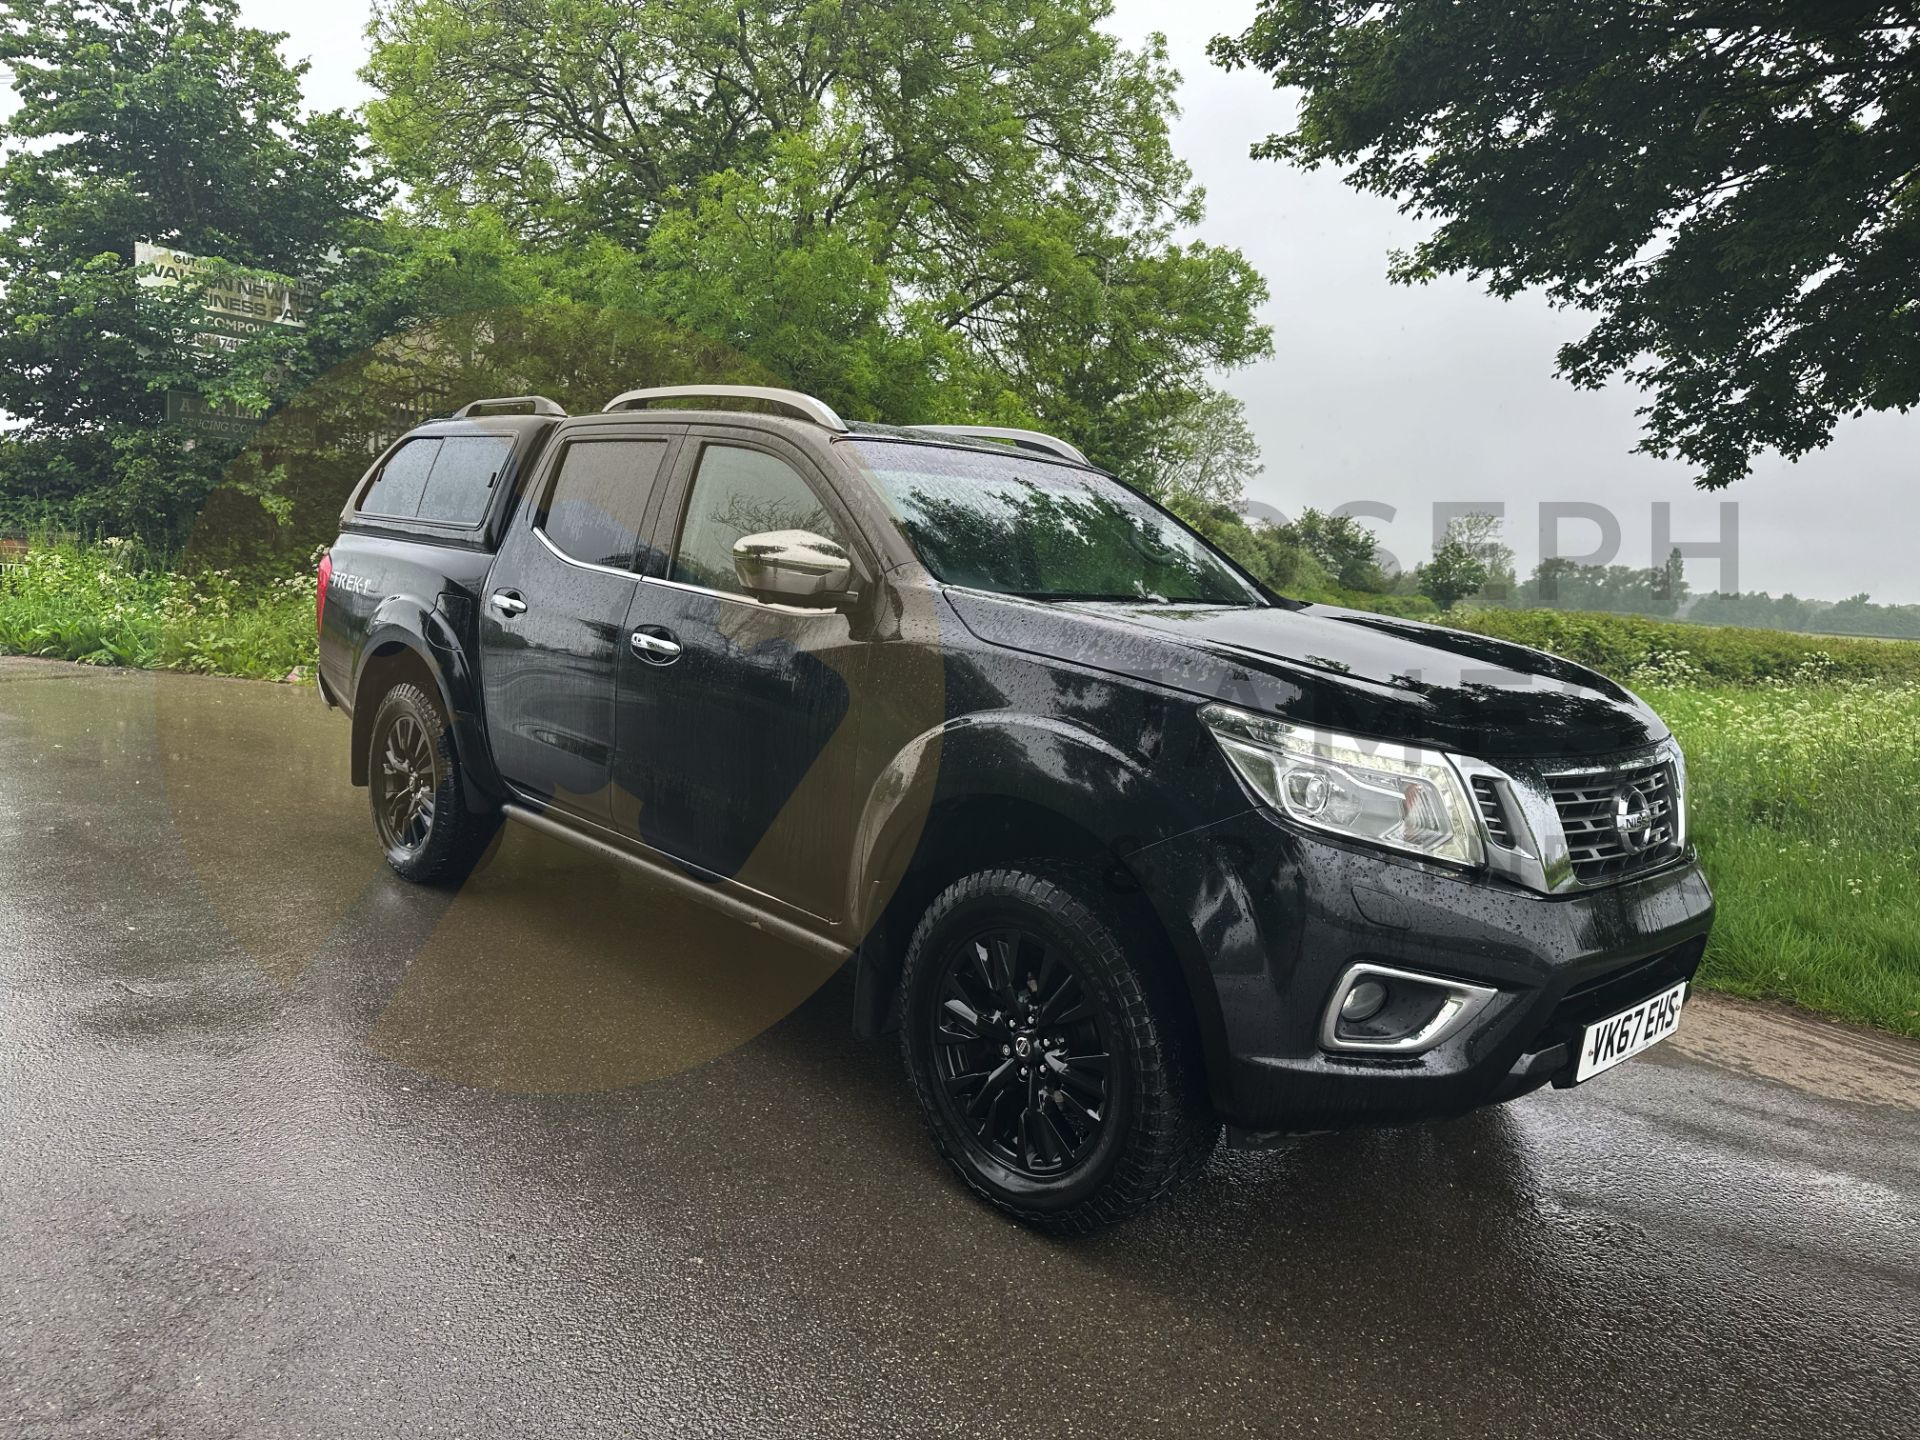 (ON SALE) NISSAN NAVARA *TREK-1 EDITION* DOUBLE CAB PICK-UP (2018 - EURO 6) 2.3 DCI - AUTOMATIC - Image 3 of 52